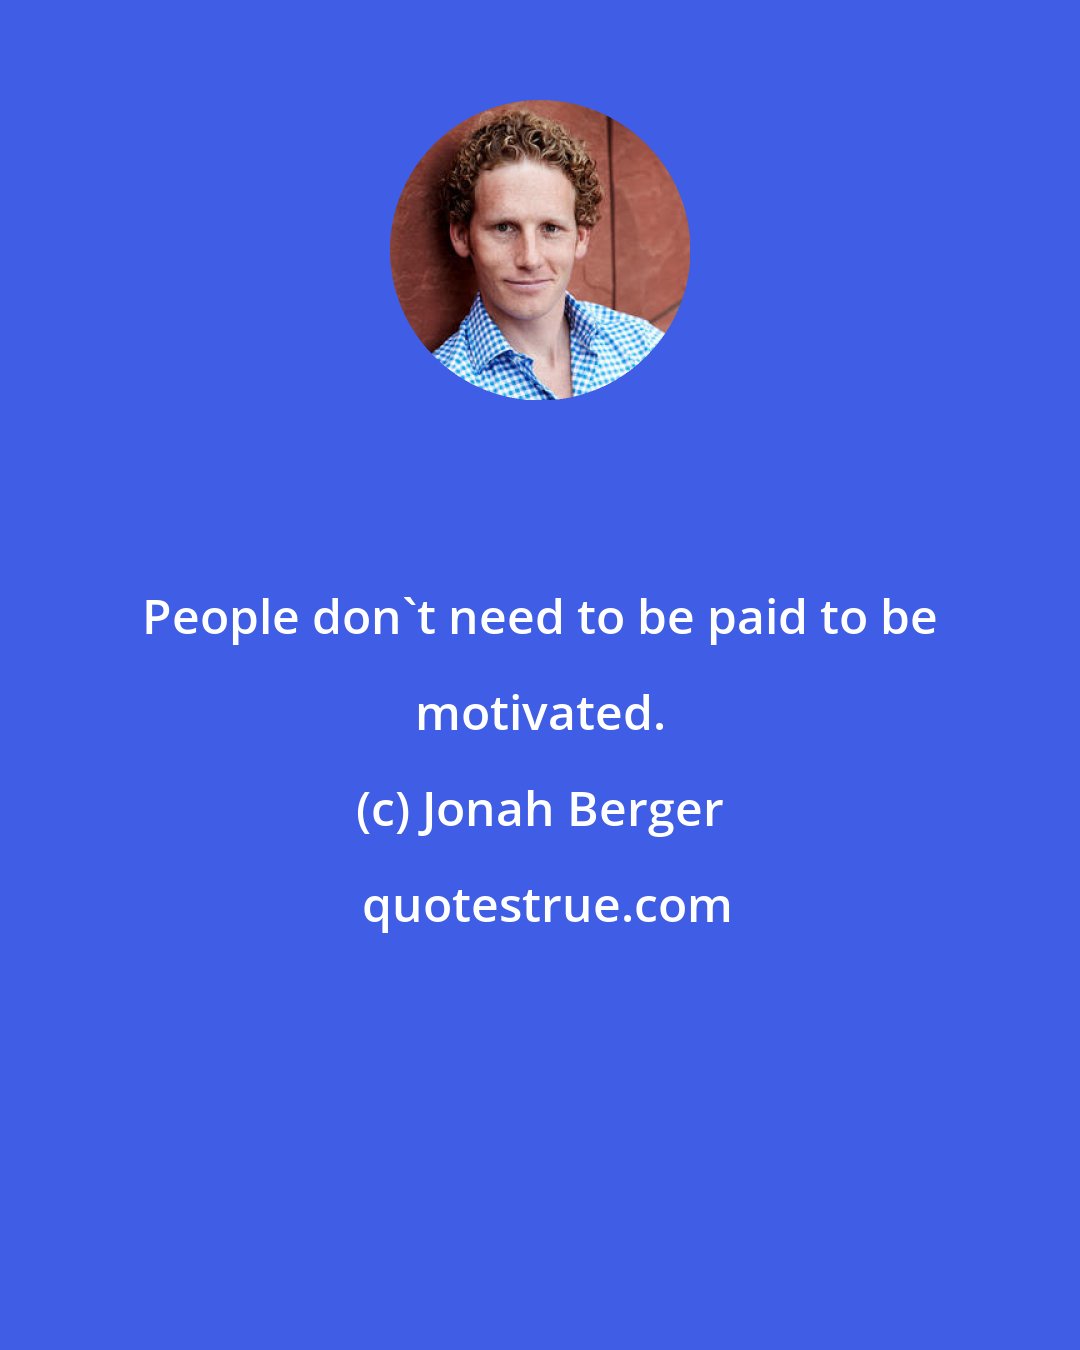 Jonah Berger: People don't need to be paid to be motivated.